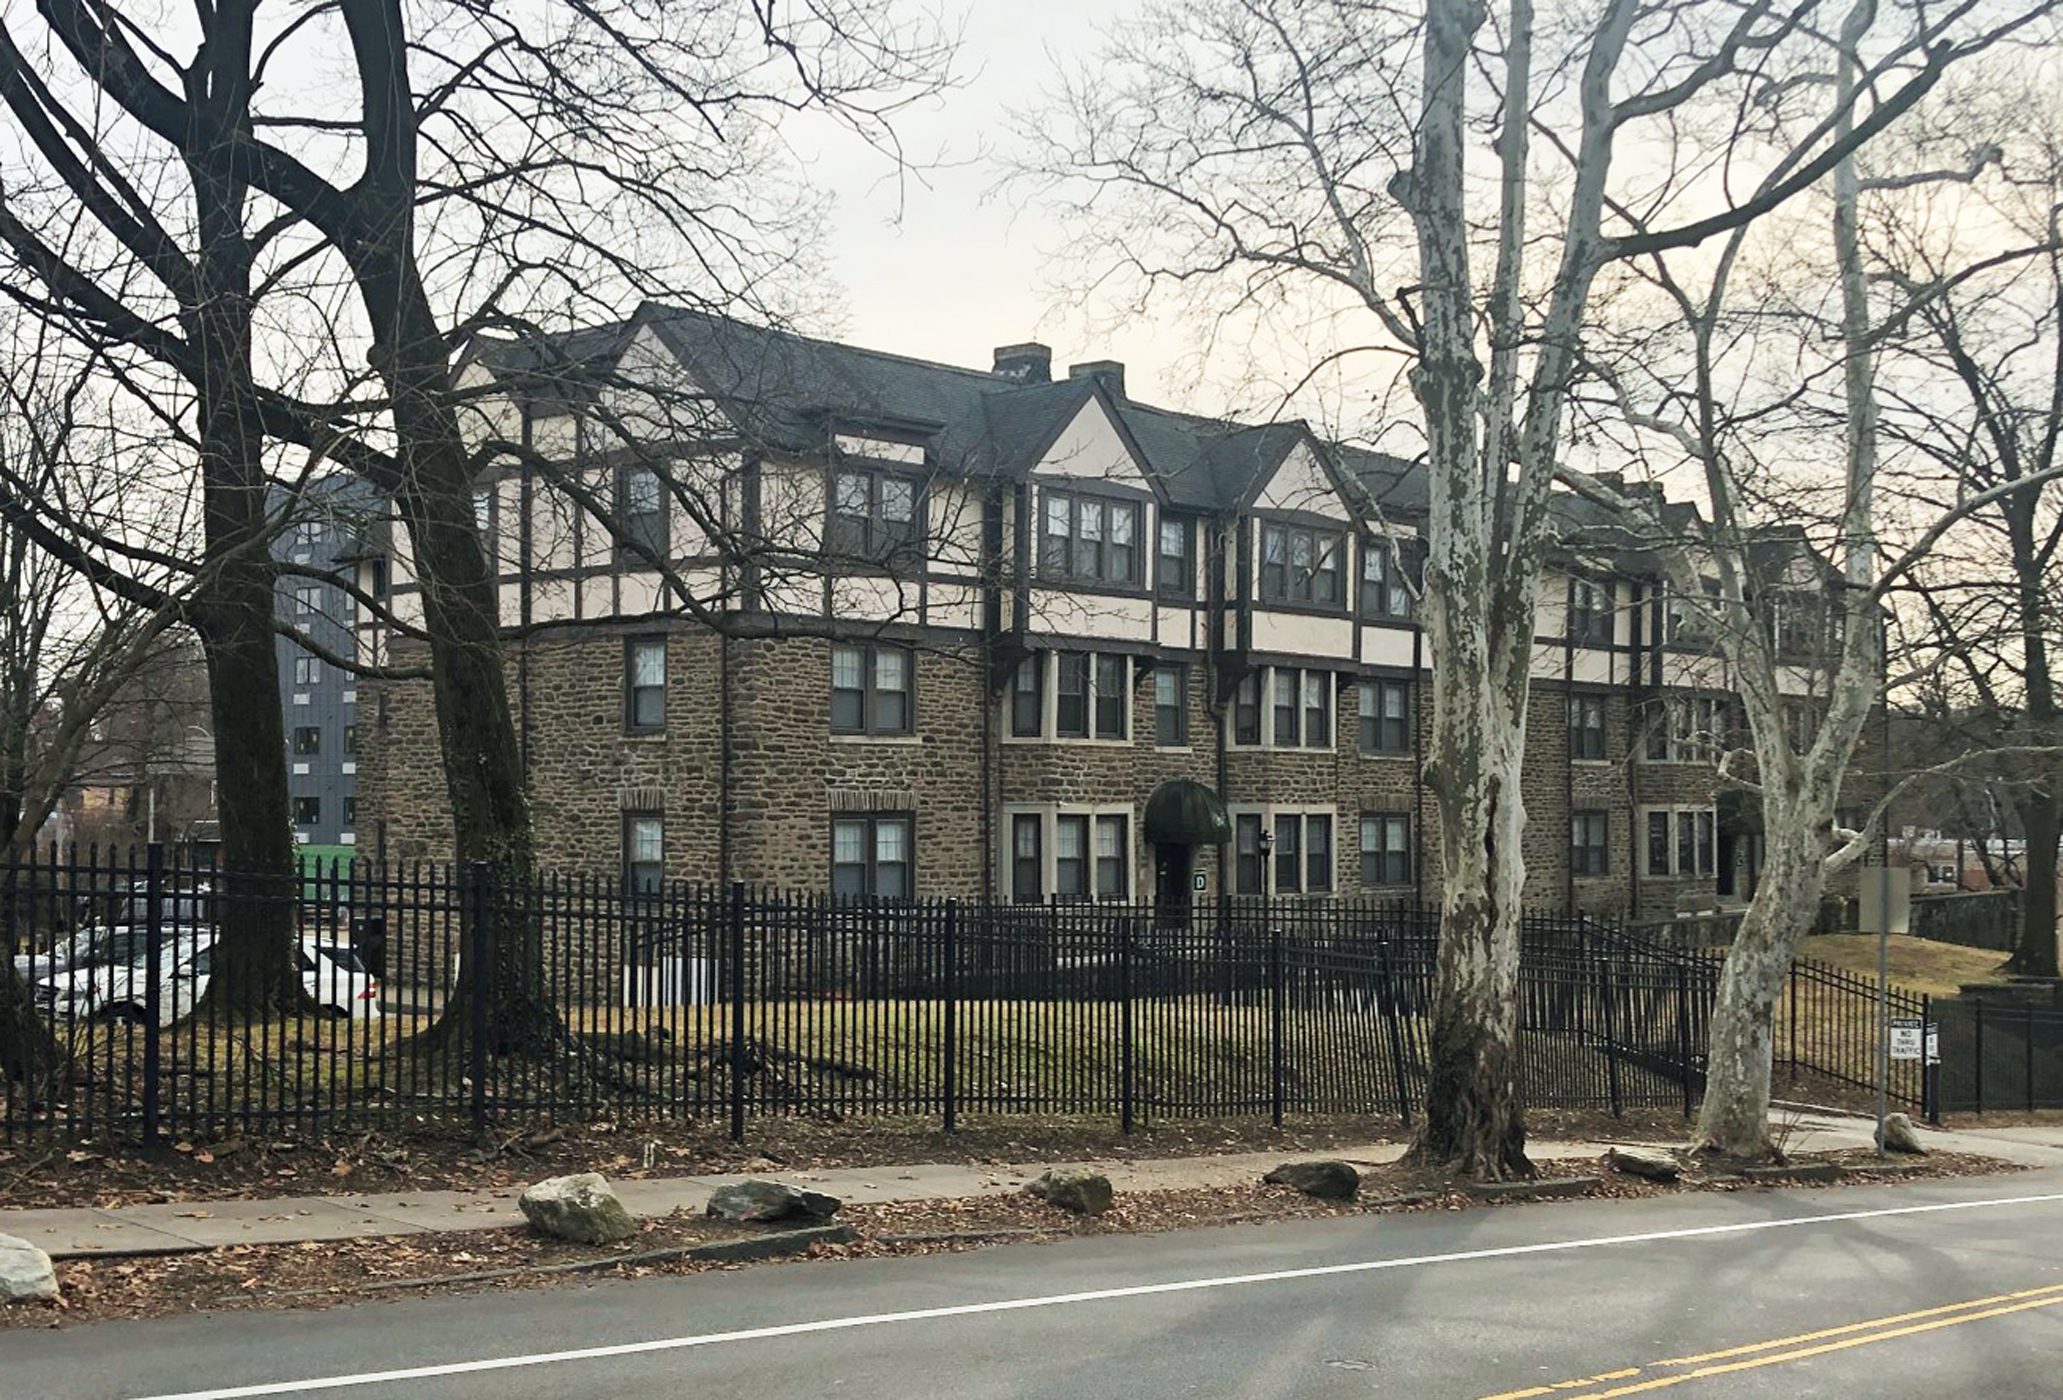 The Wood Norton Residences, and apartment building with a stone base and English Tudor style upper floors.